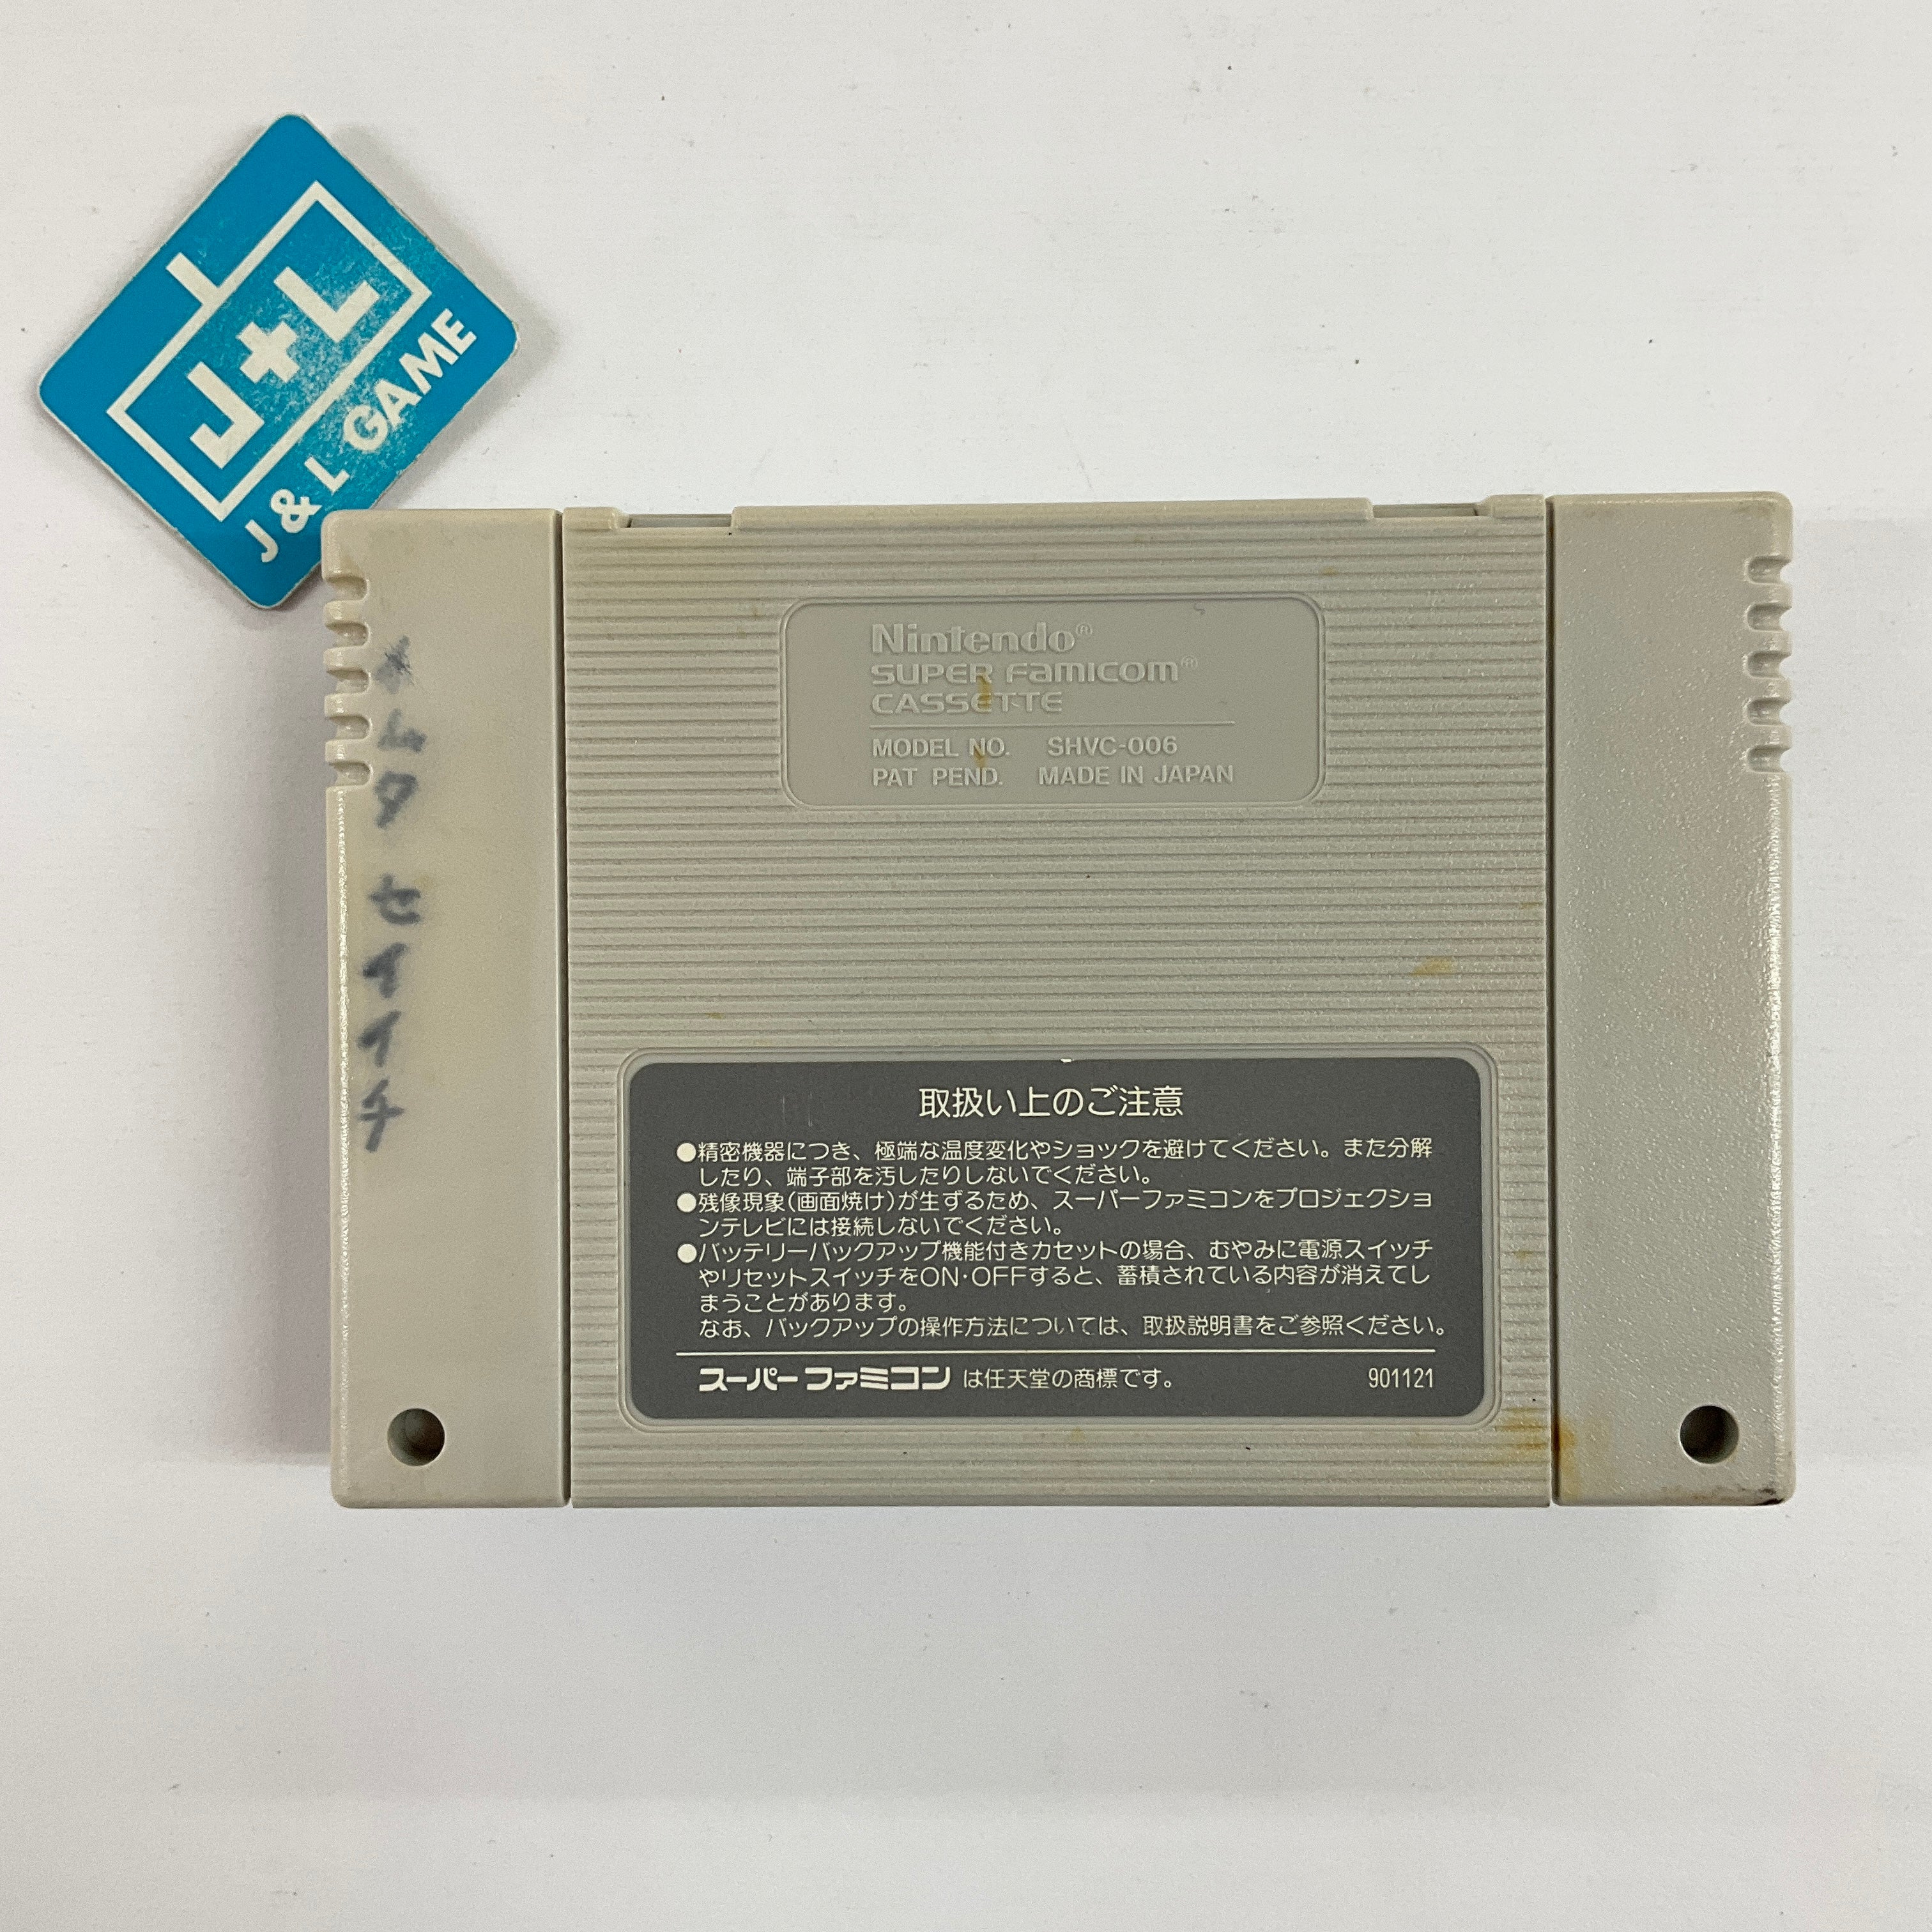 The Adventures of The Rocketeer - (SFC) Super Famicom [Pre-Owned] (Japanese Import) Video Games IGS (Japan)   